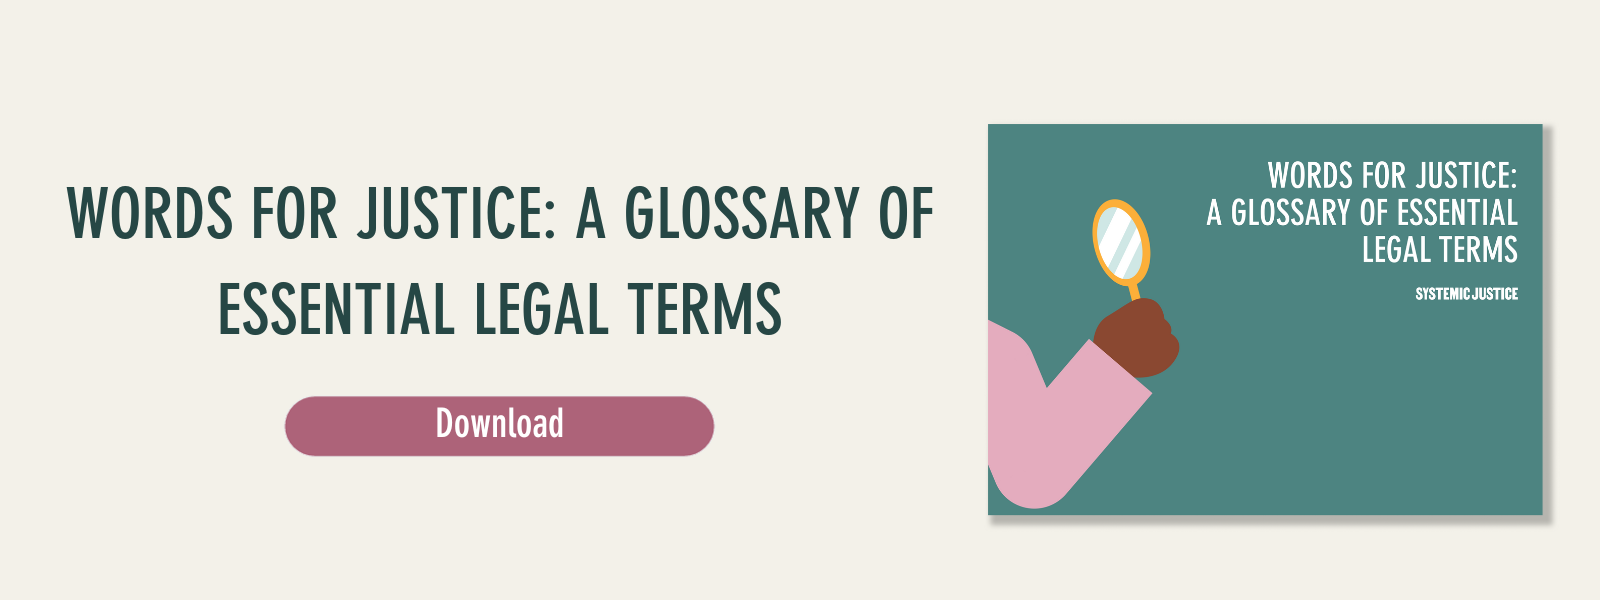 Words for justice: glossary of essential legal language